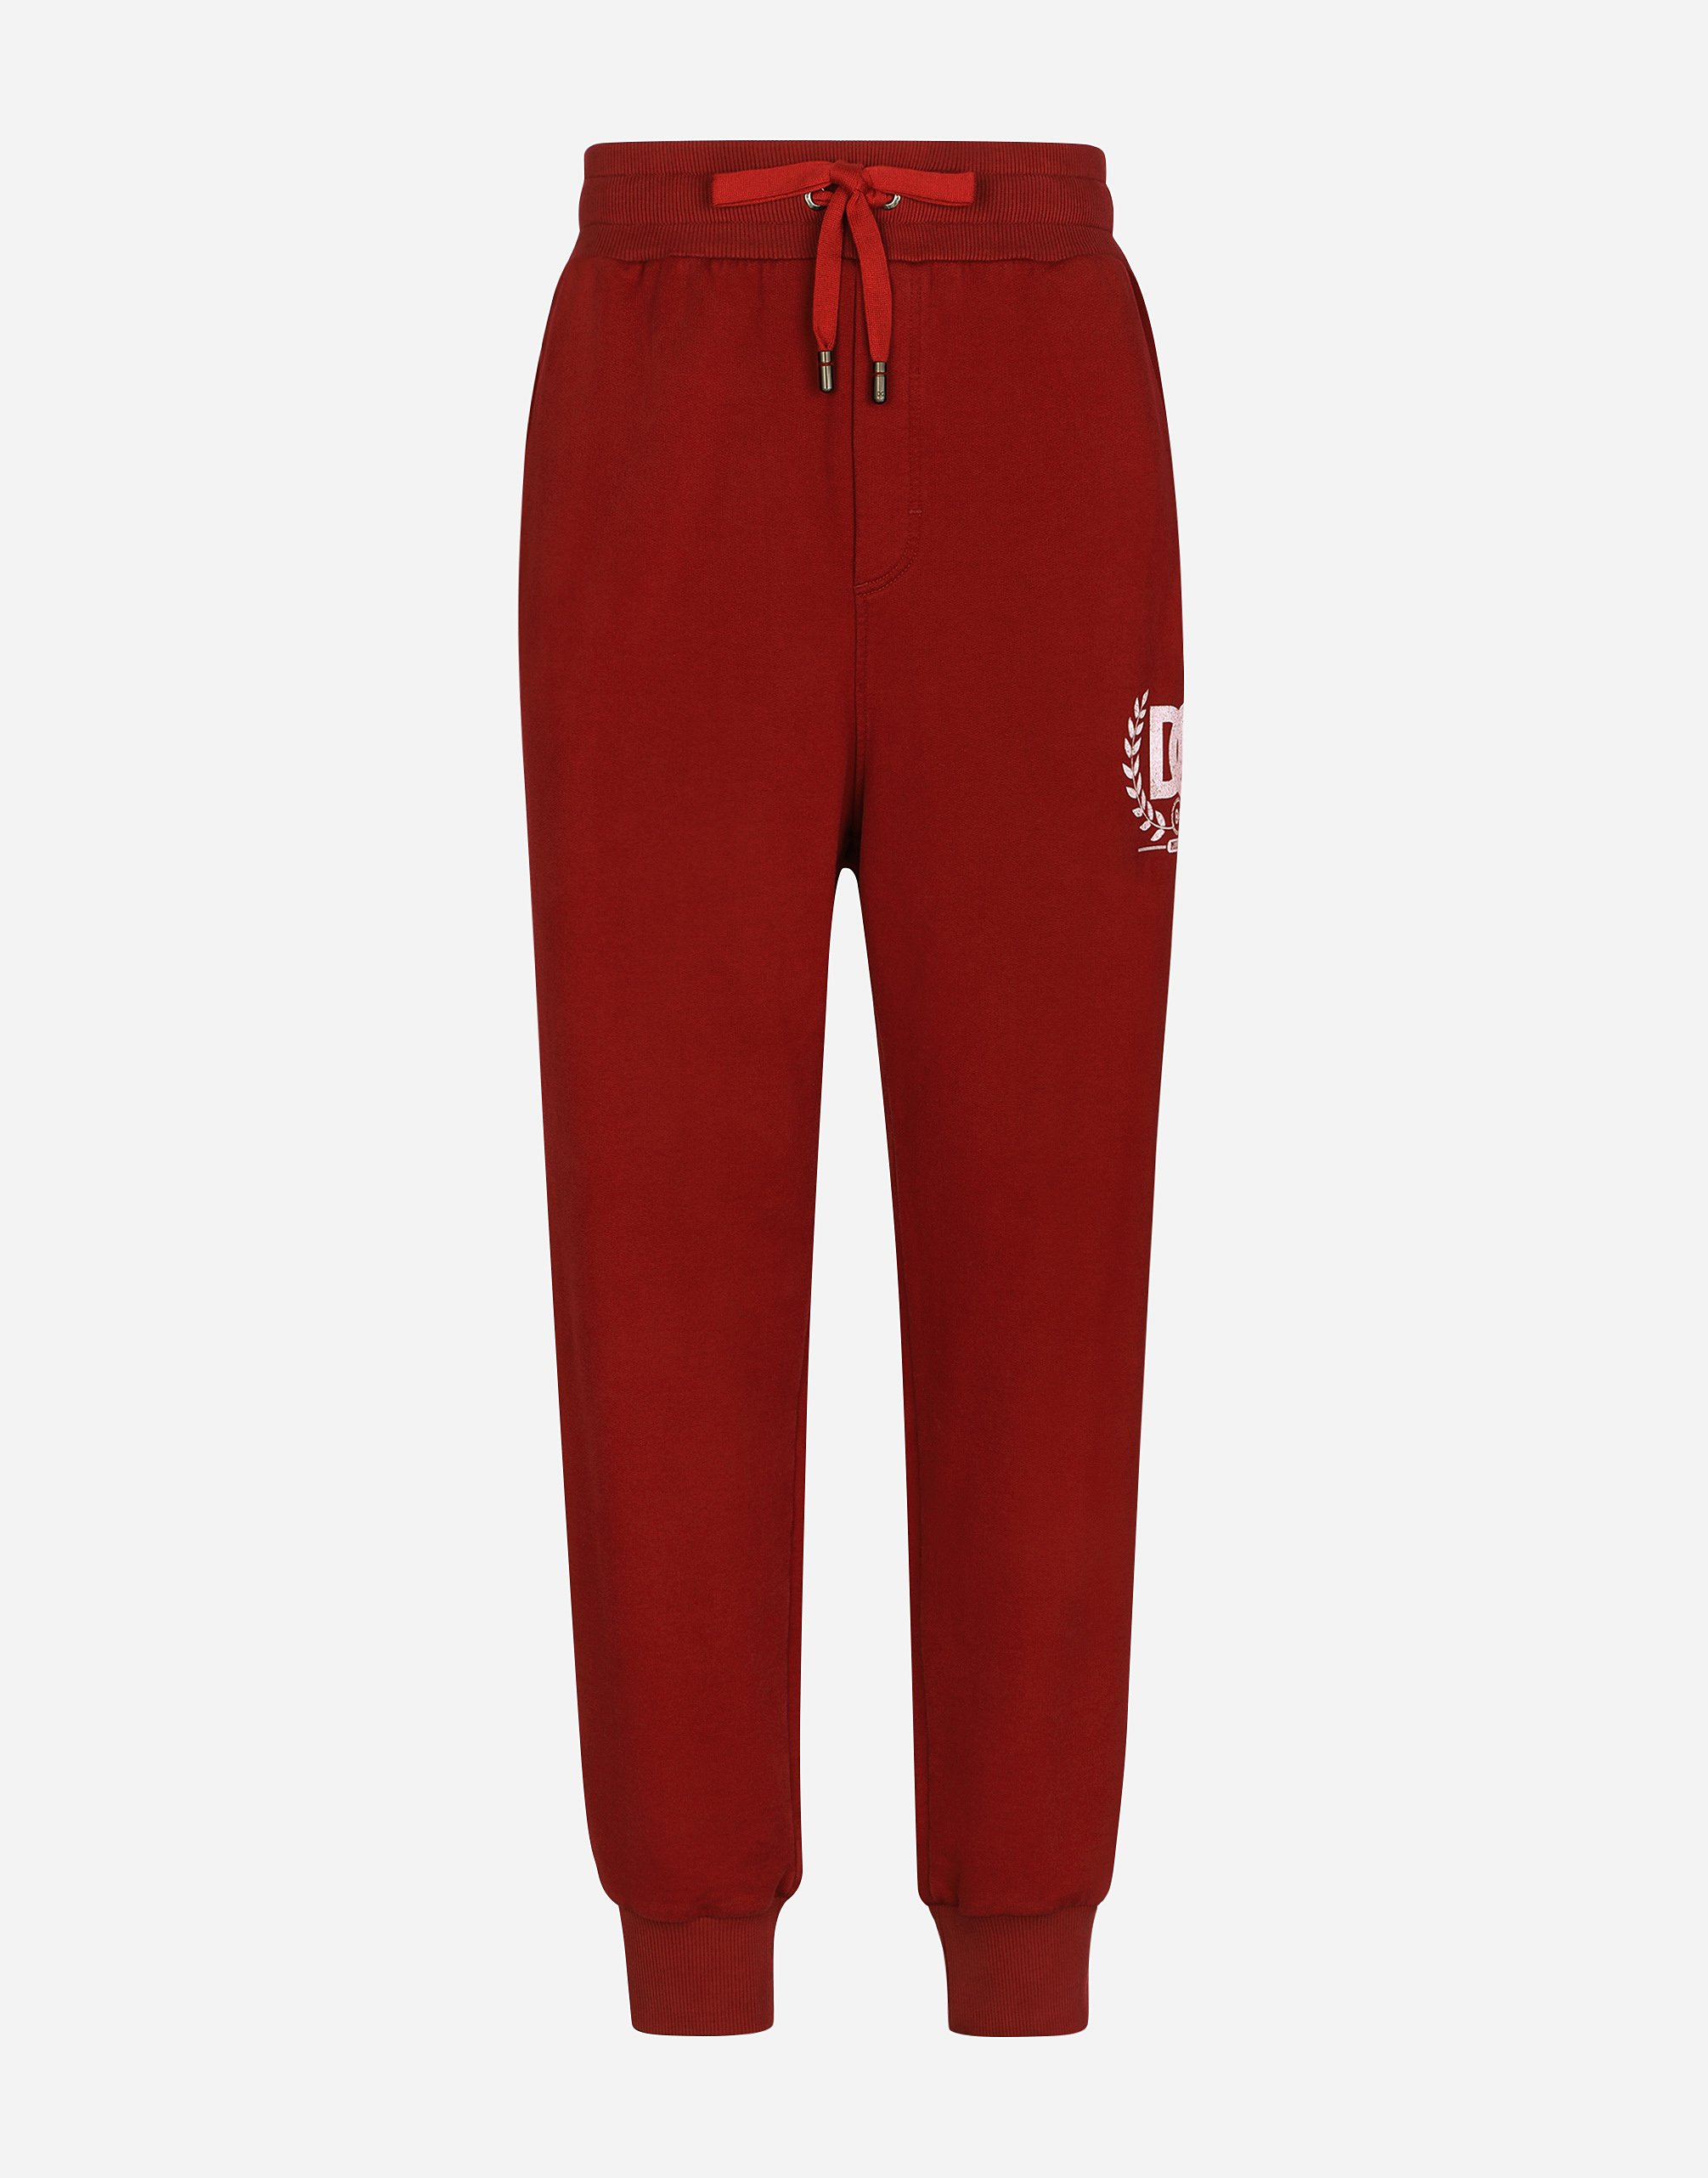 Dolce & Gabbana Jersey Jogging Pants With Dg Print In Burgundy